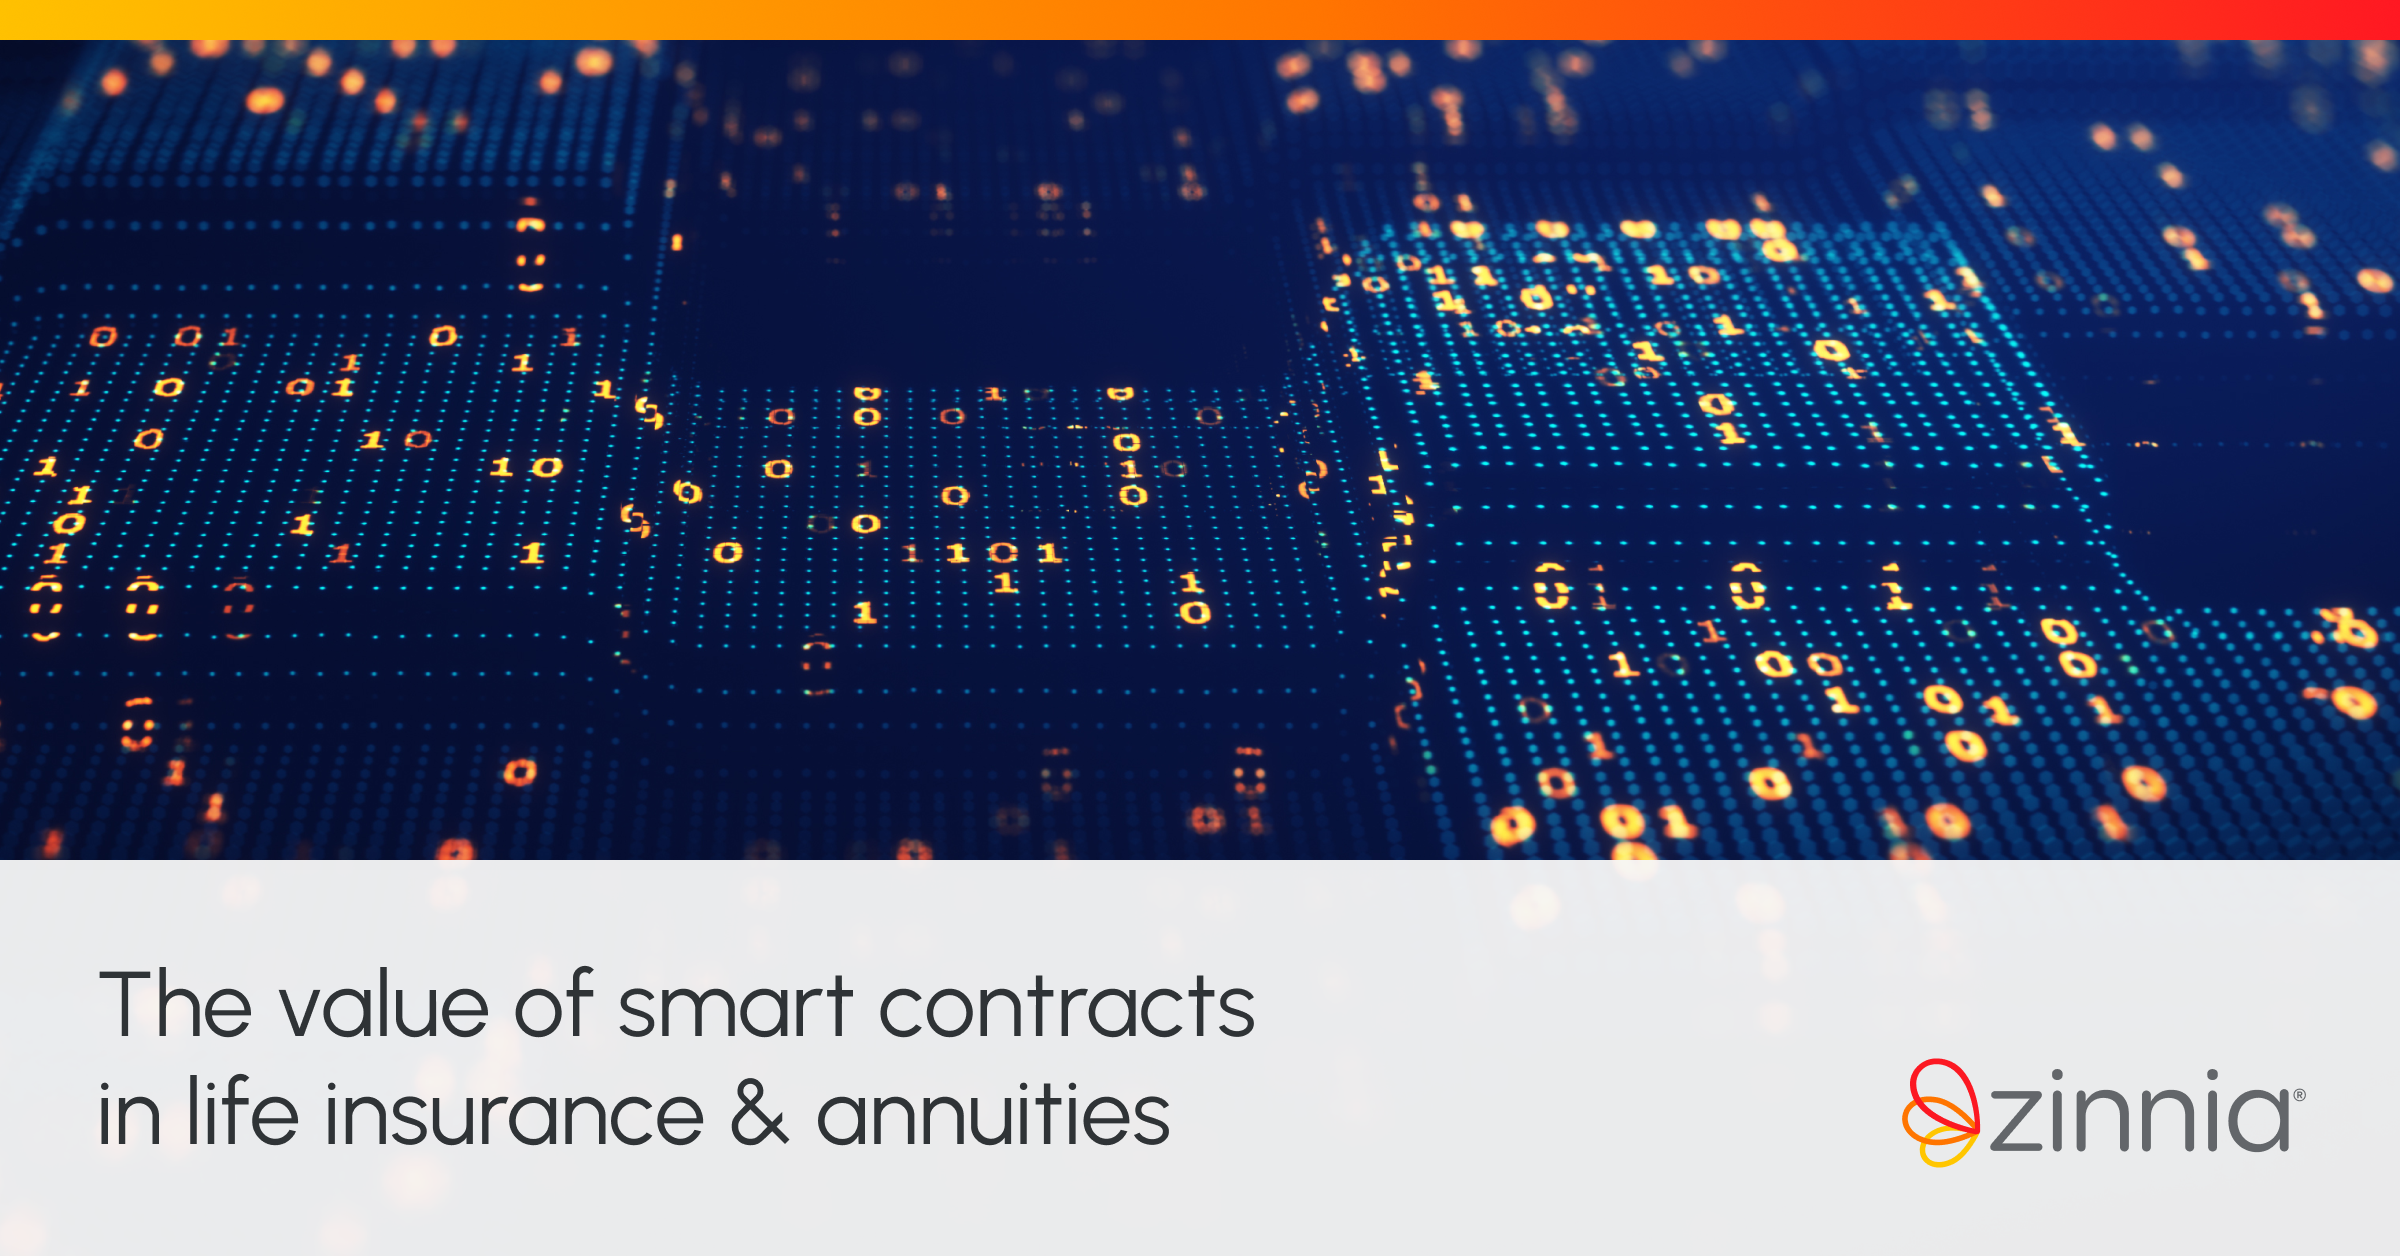 Social_The Value of Smart Contracts in Life Insurance & Annuities